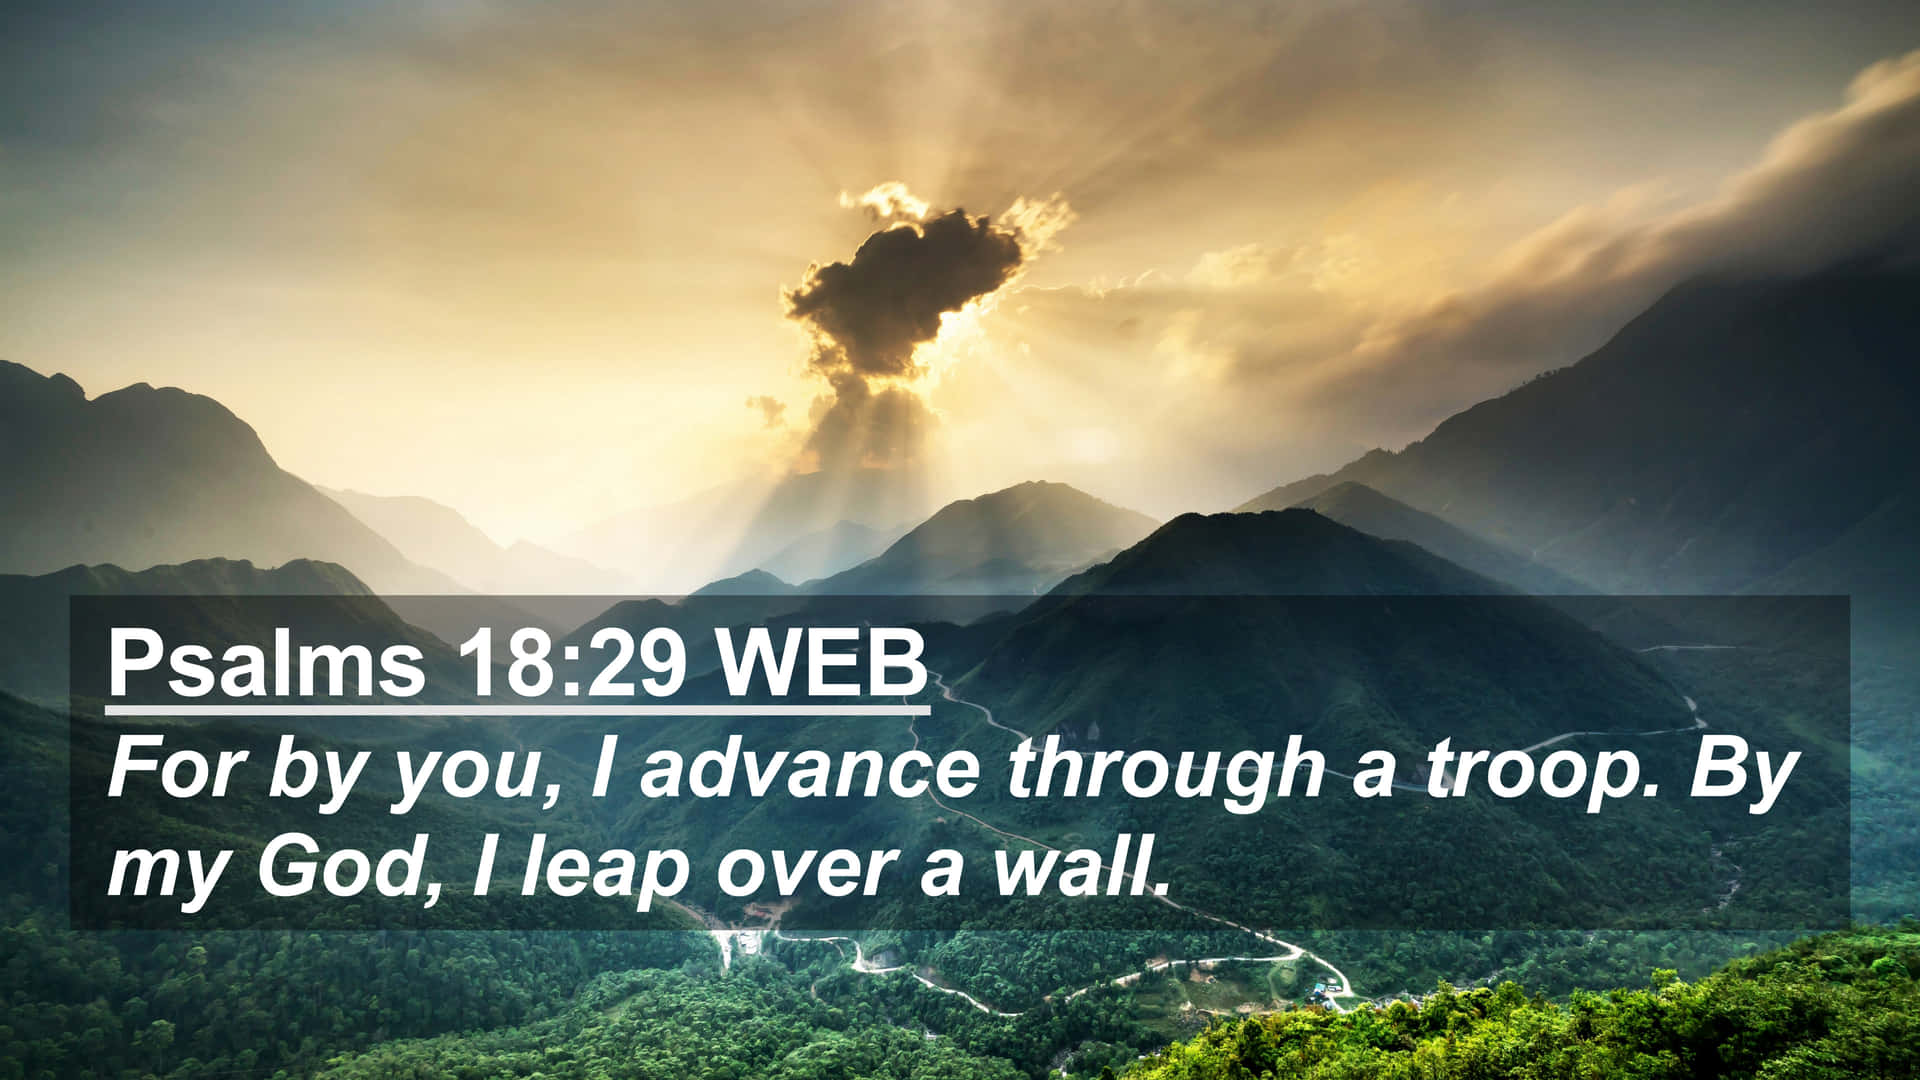 Advanced Mountains Bible Quote Wallpaper